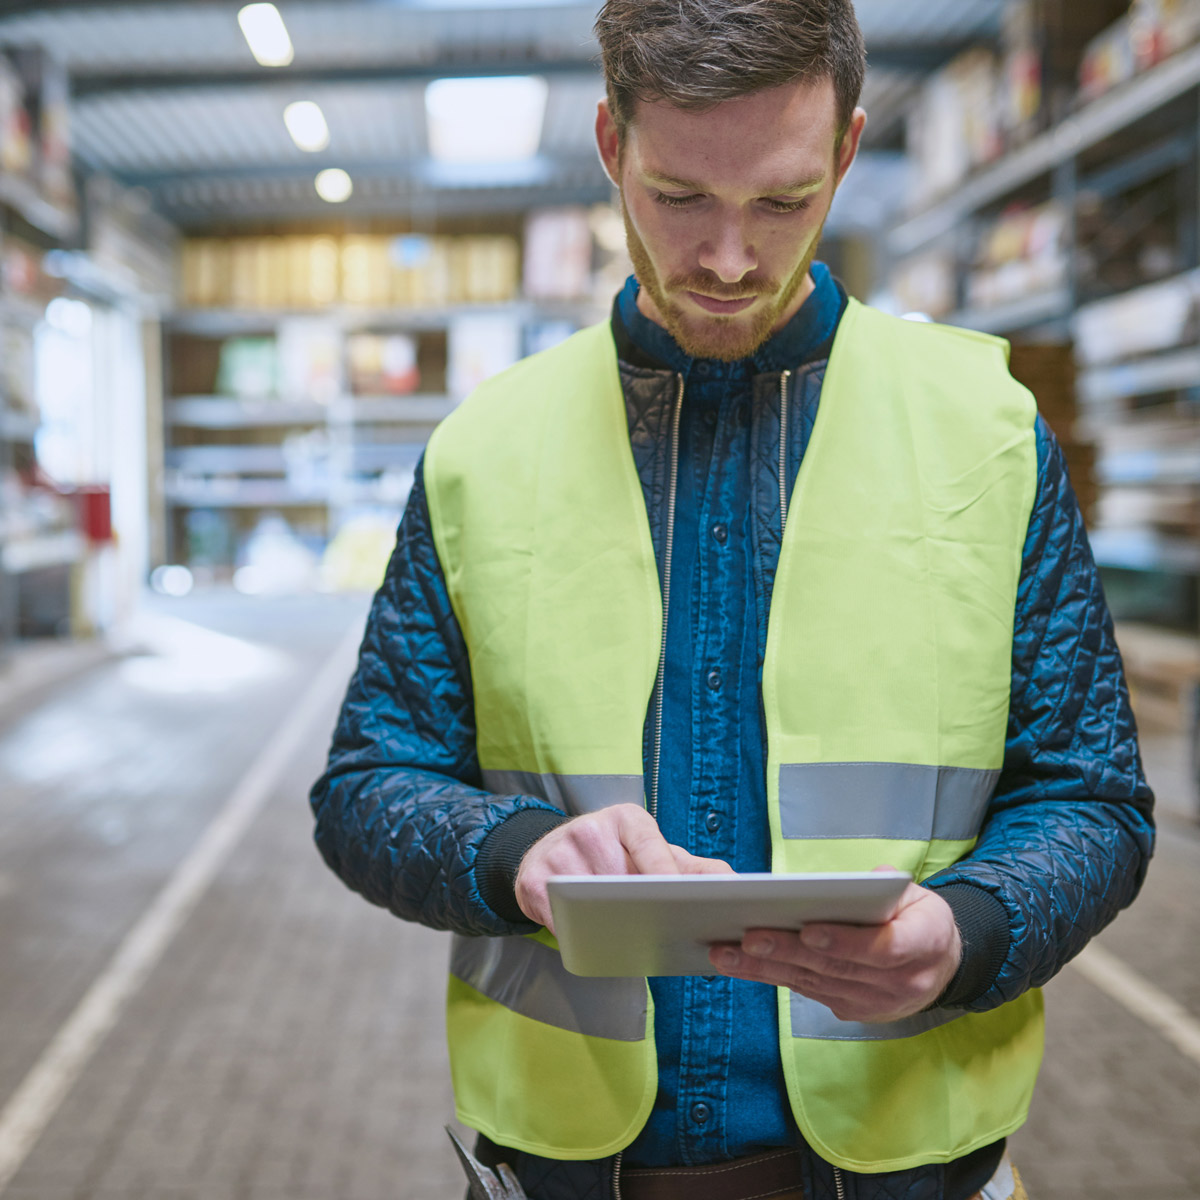 Man in high visibility vest looking at tablet screen in a warehouse